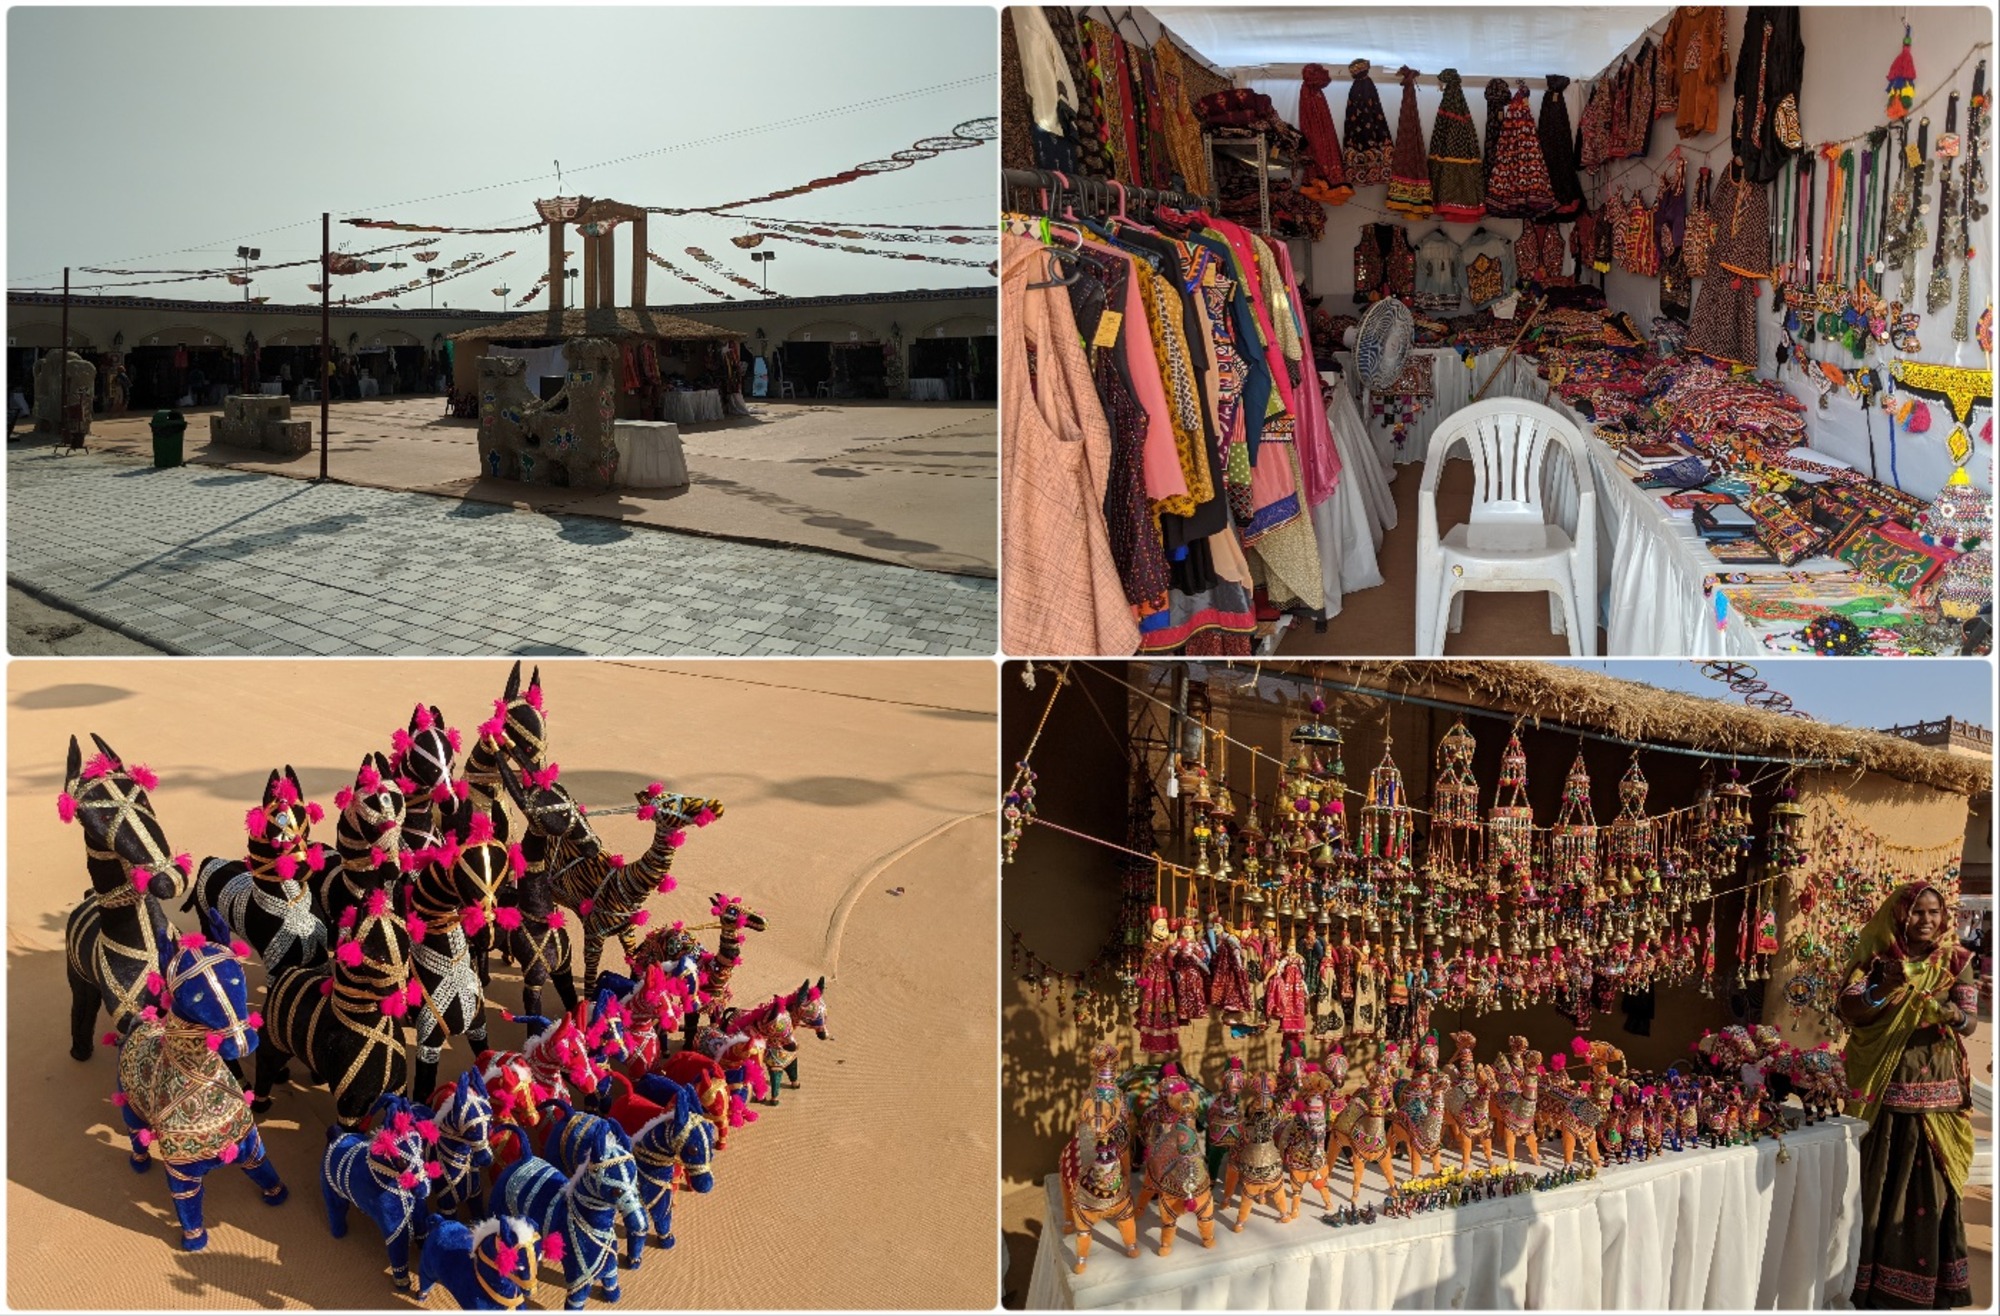 Haat (market) selling locally made textile and handicraft items